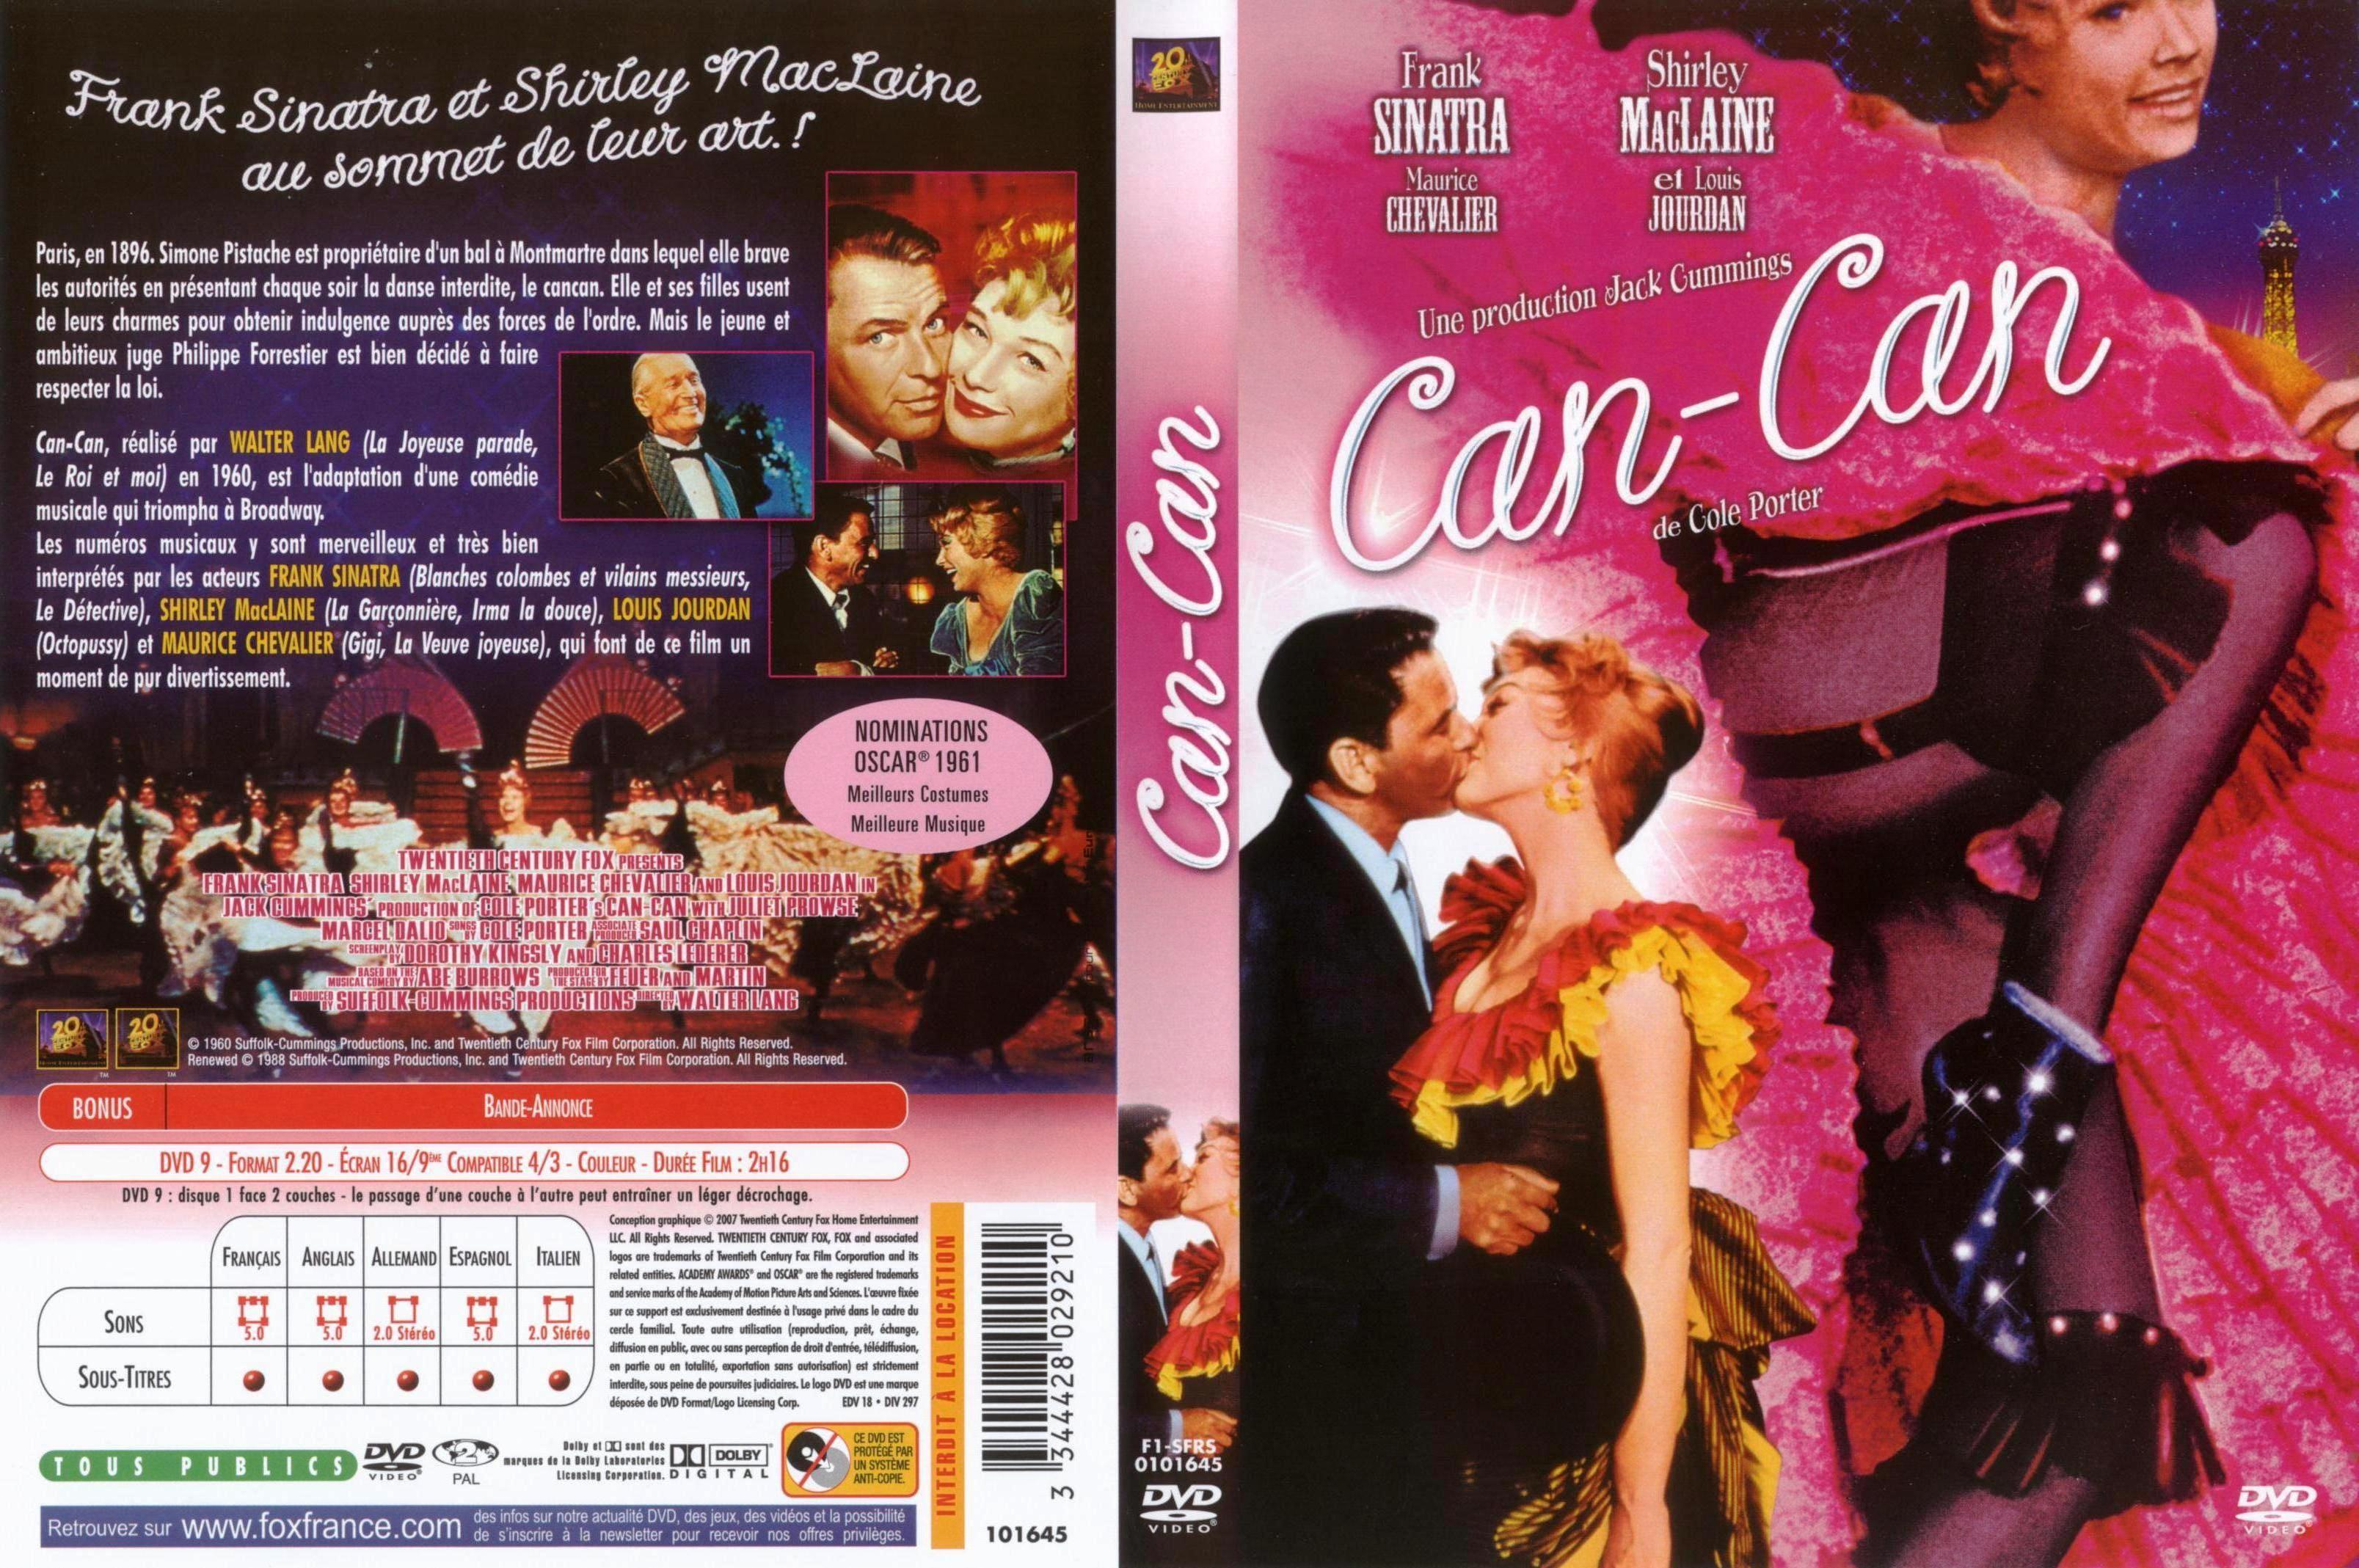 Jaquette DVD Can-Can